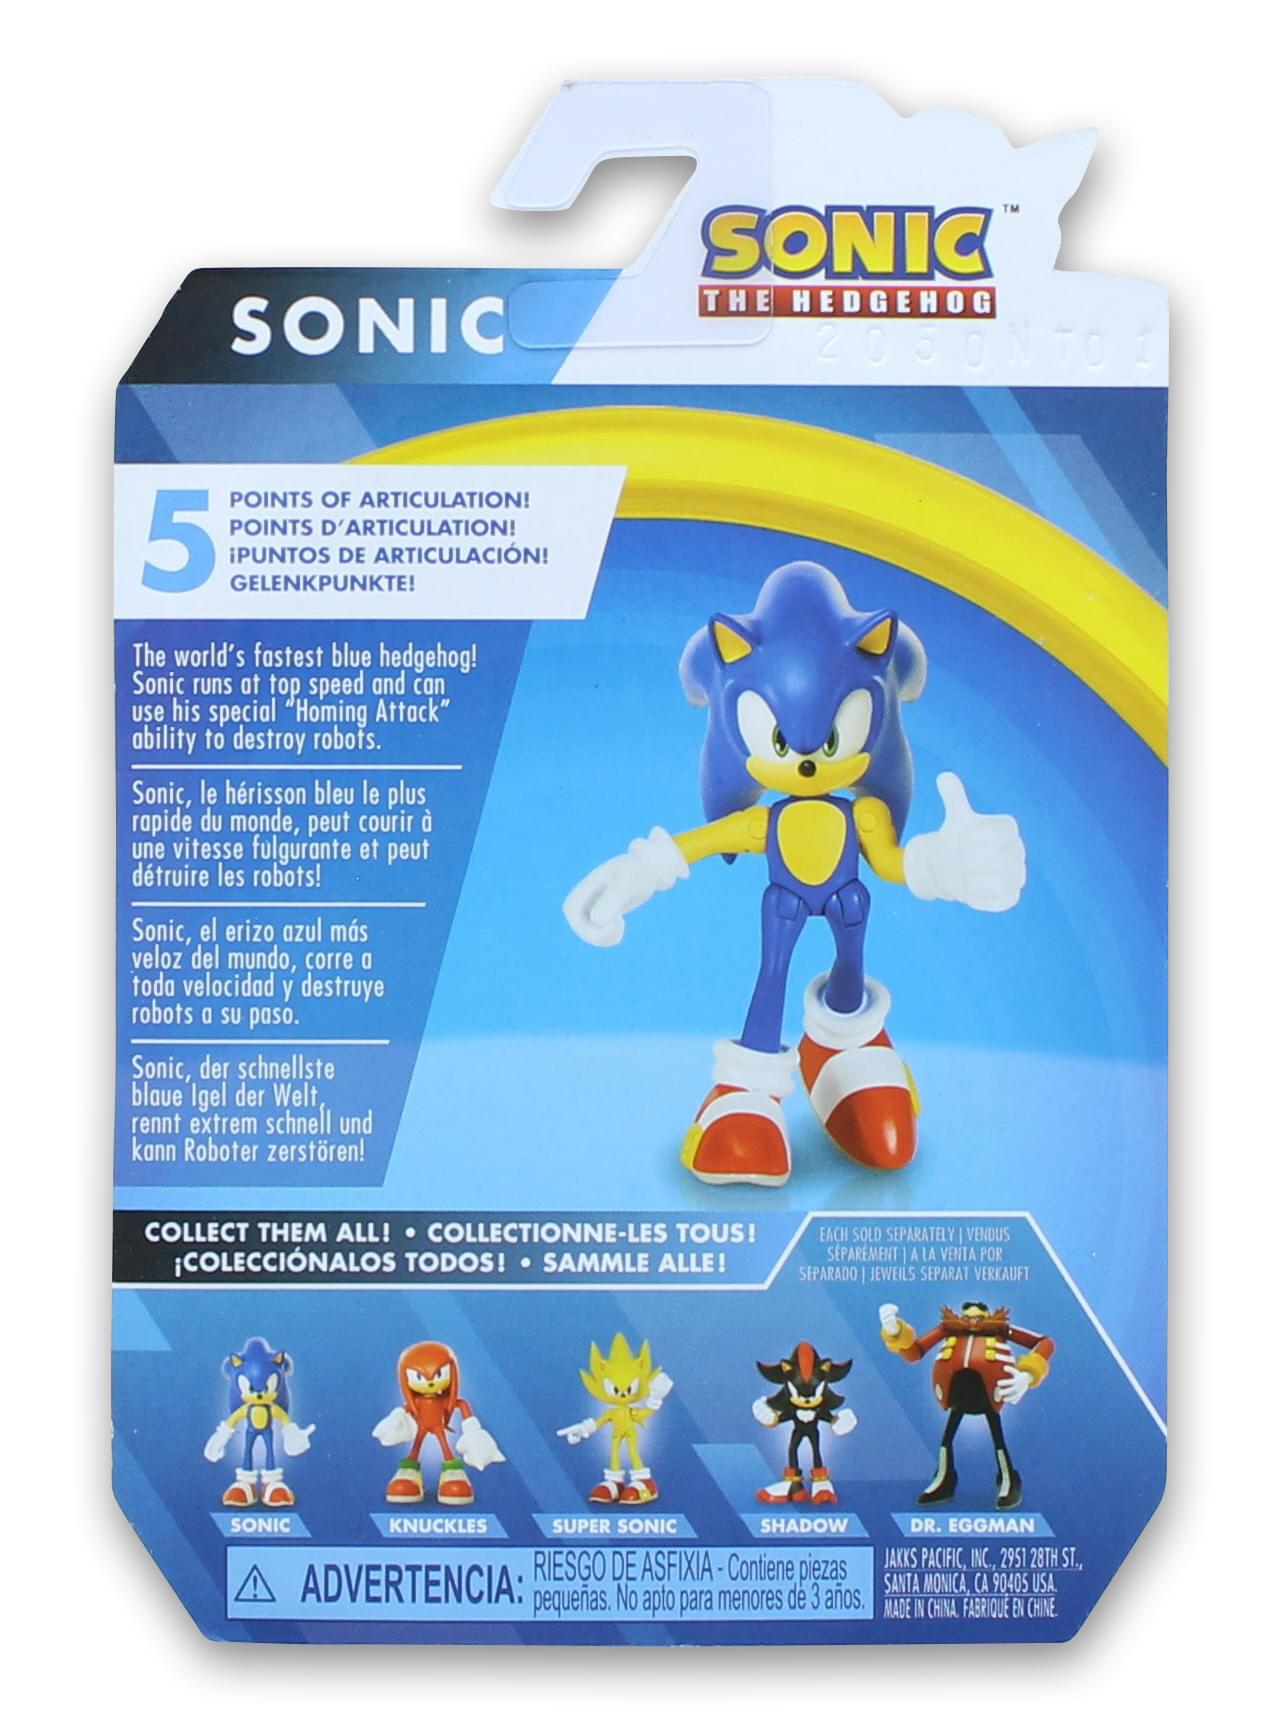 Sonic the Hedgehog 2.5 Inch Action Figure | Modern Sonic